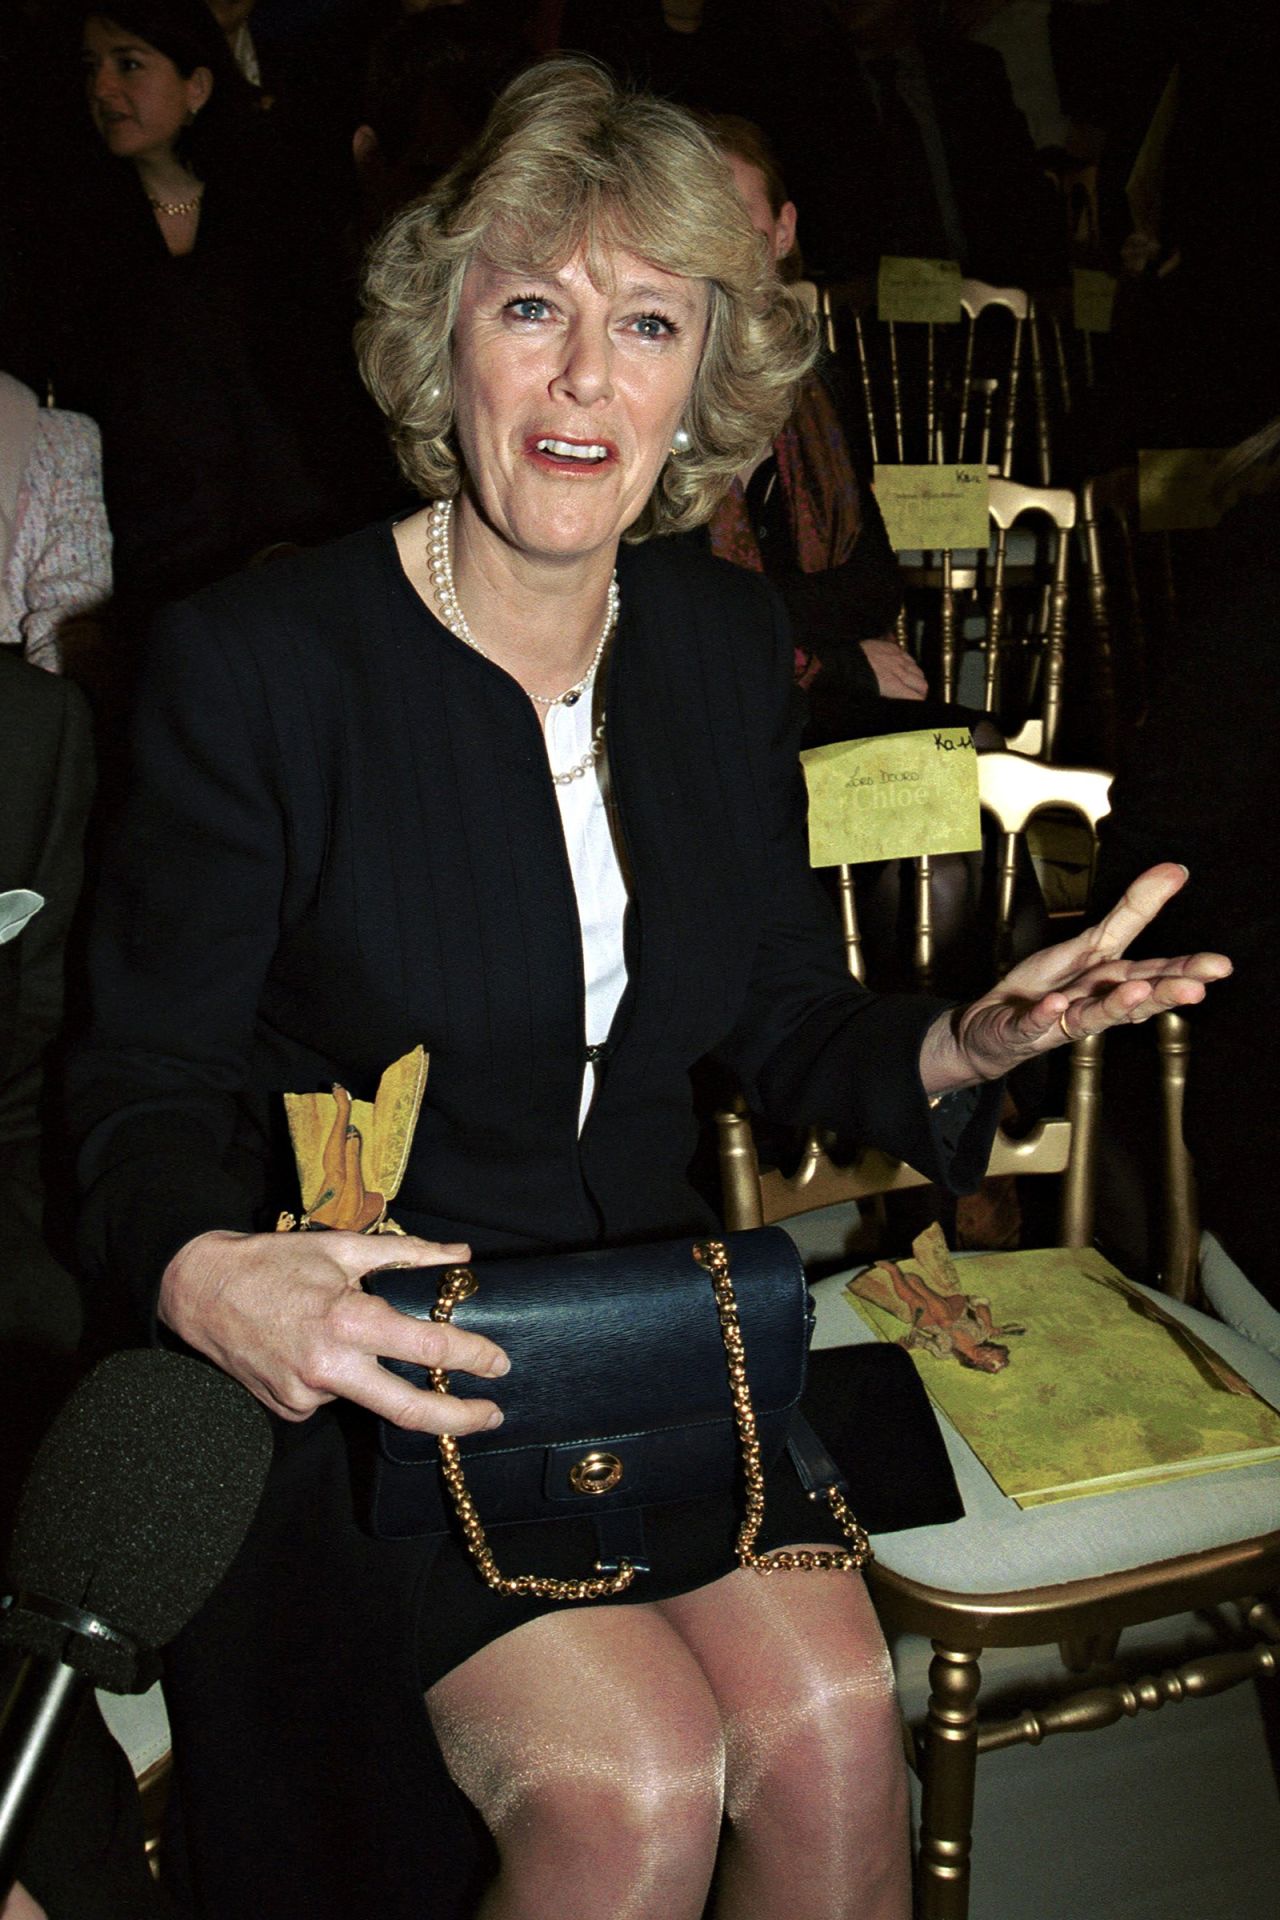 Long before it was expected that Camilla publicly support British creative exports, she was seen cheering on Stella McCartney during her Fall-Winter 2000 show for Chloé at Paris Fashion Week. Perched on her knee was a black leather Chloé Epi crossbody bag, with a gold chain strap and clasp.